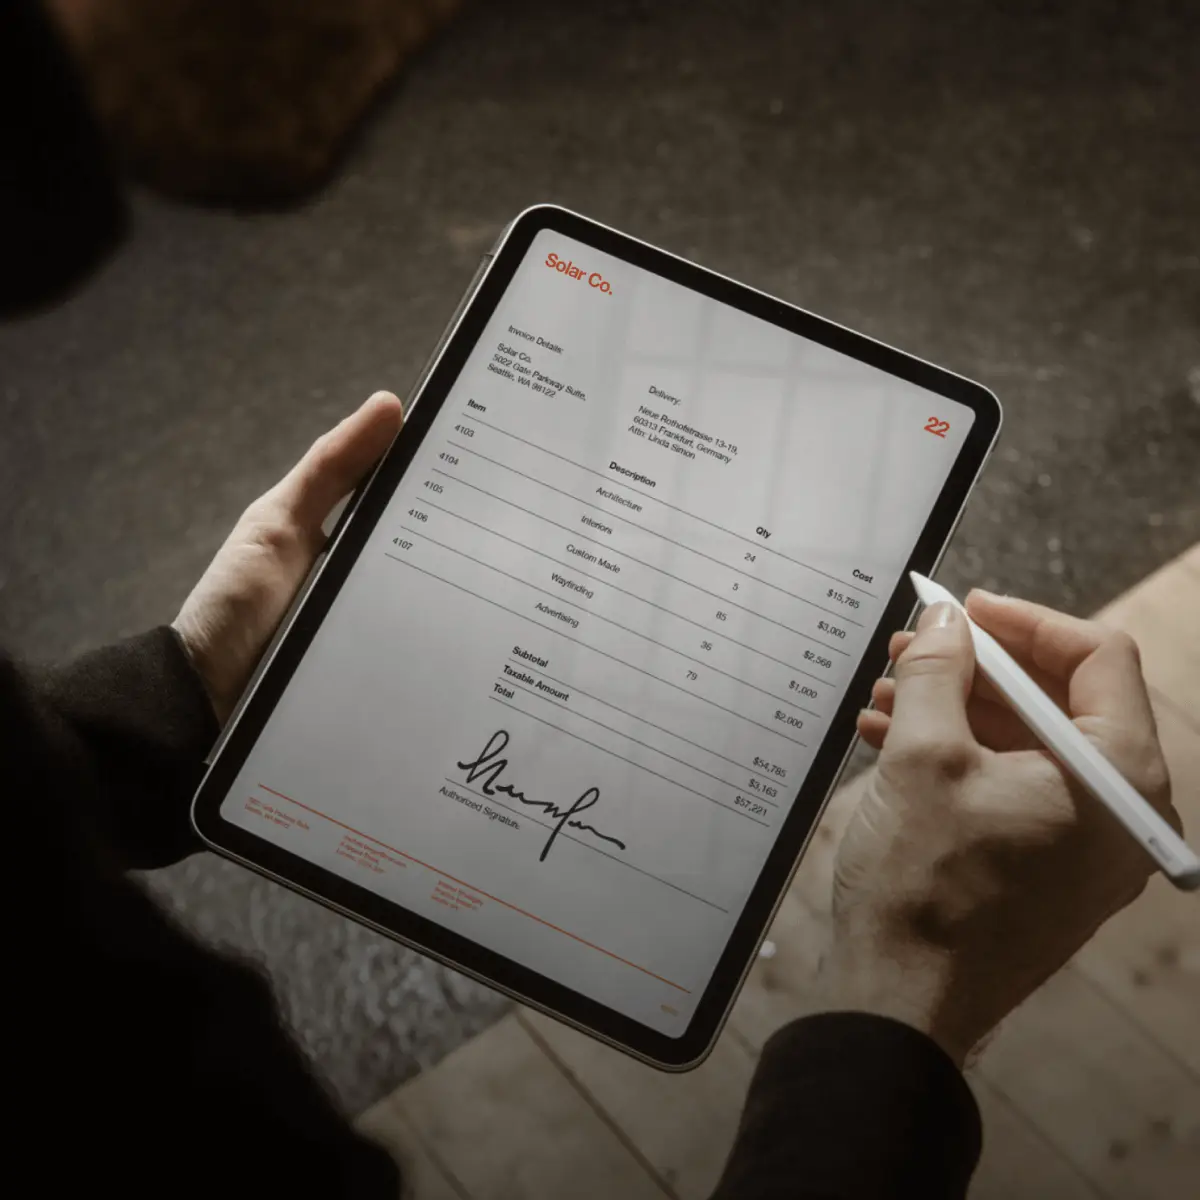 A solar manufacturing company uses DocuSign eSignature on a tablet to sign an invoice.